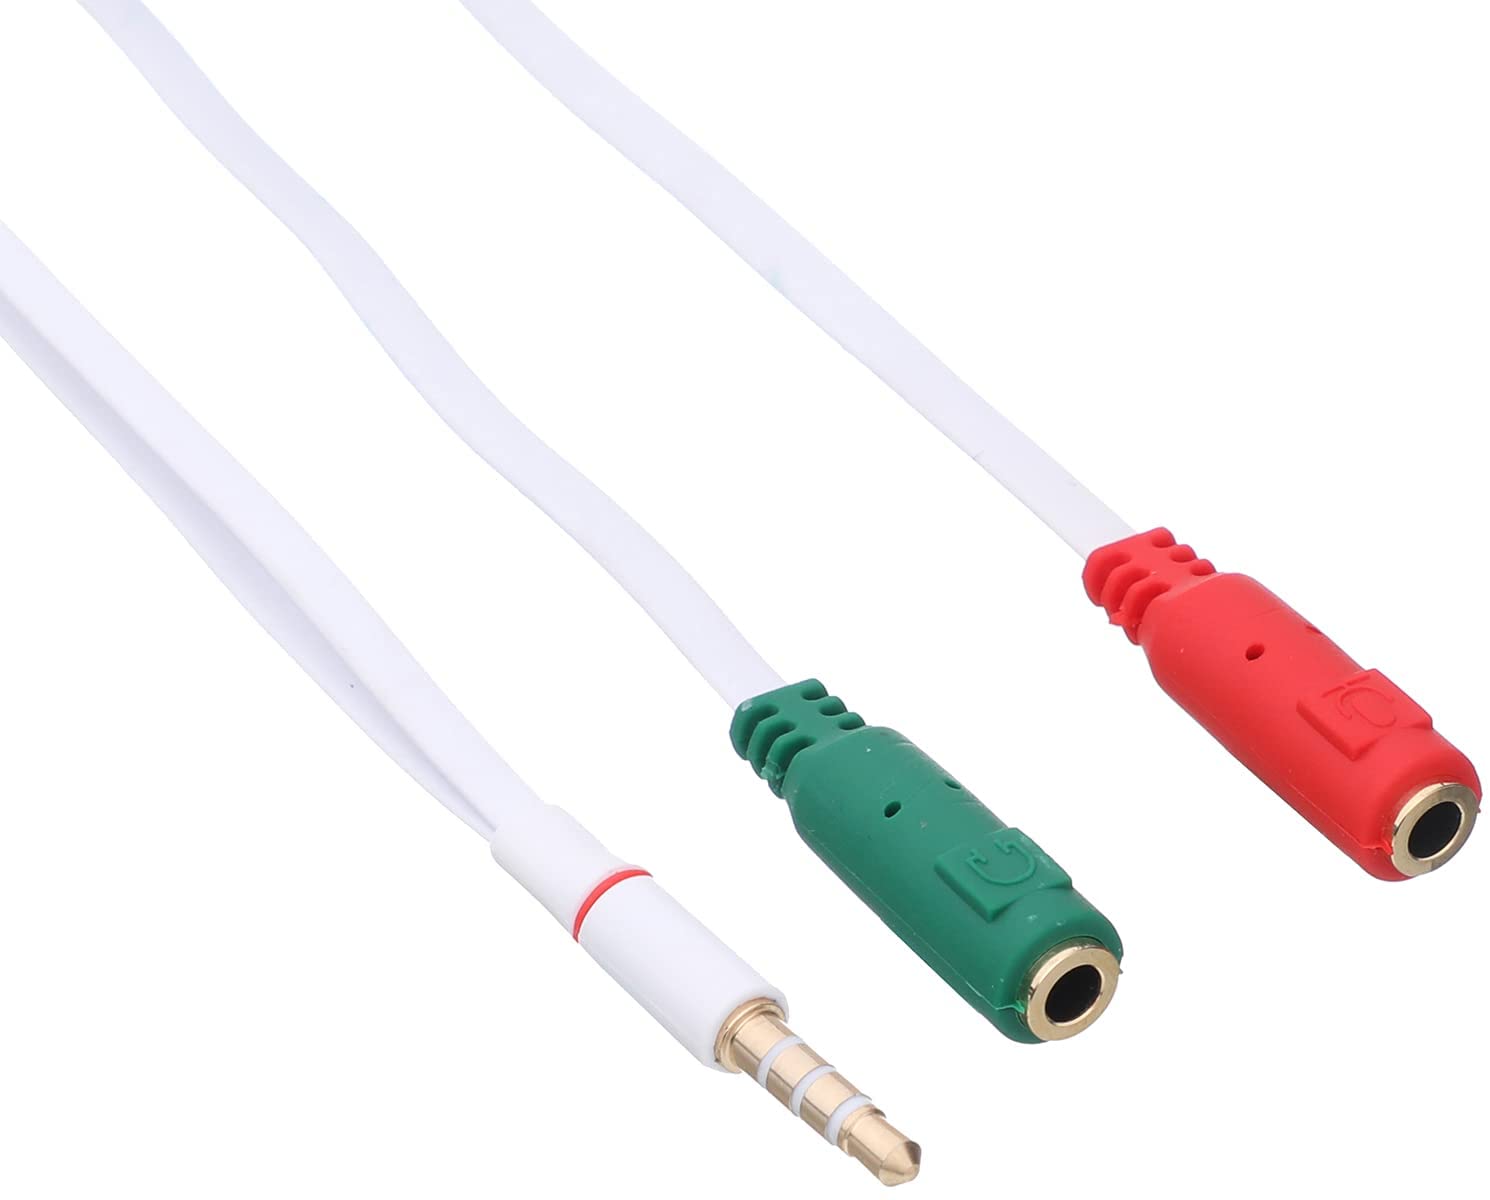 Keendex 2-In-1 Audio AUX Splitter Cable, 1 Male to 2 Female, 10 Centimeter, Multi Color- 1909